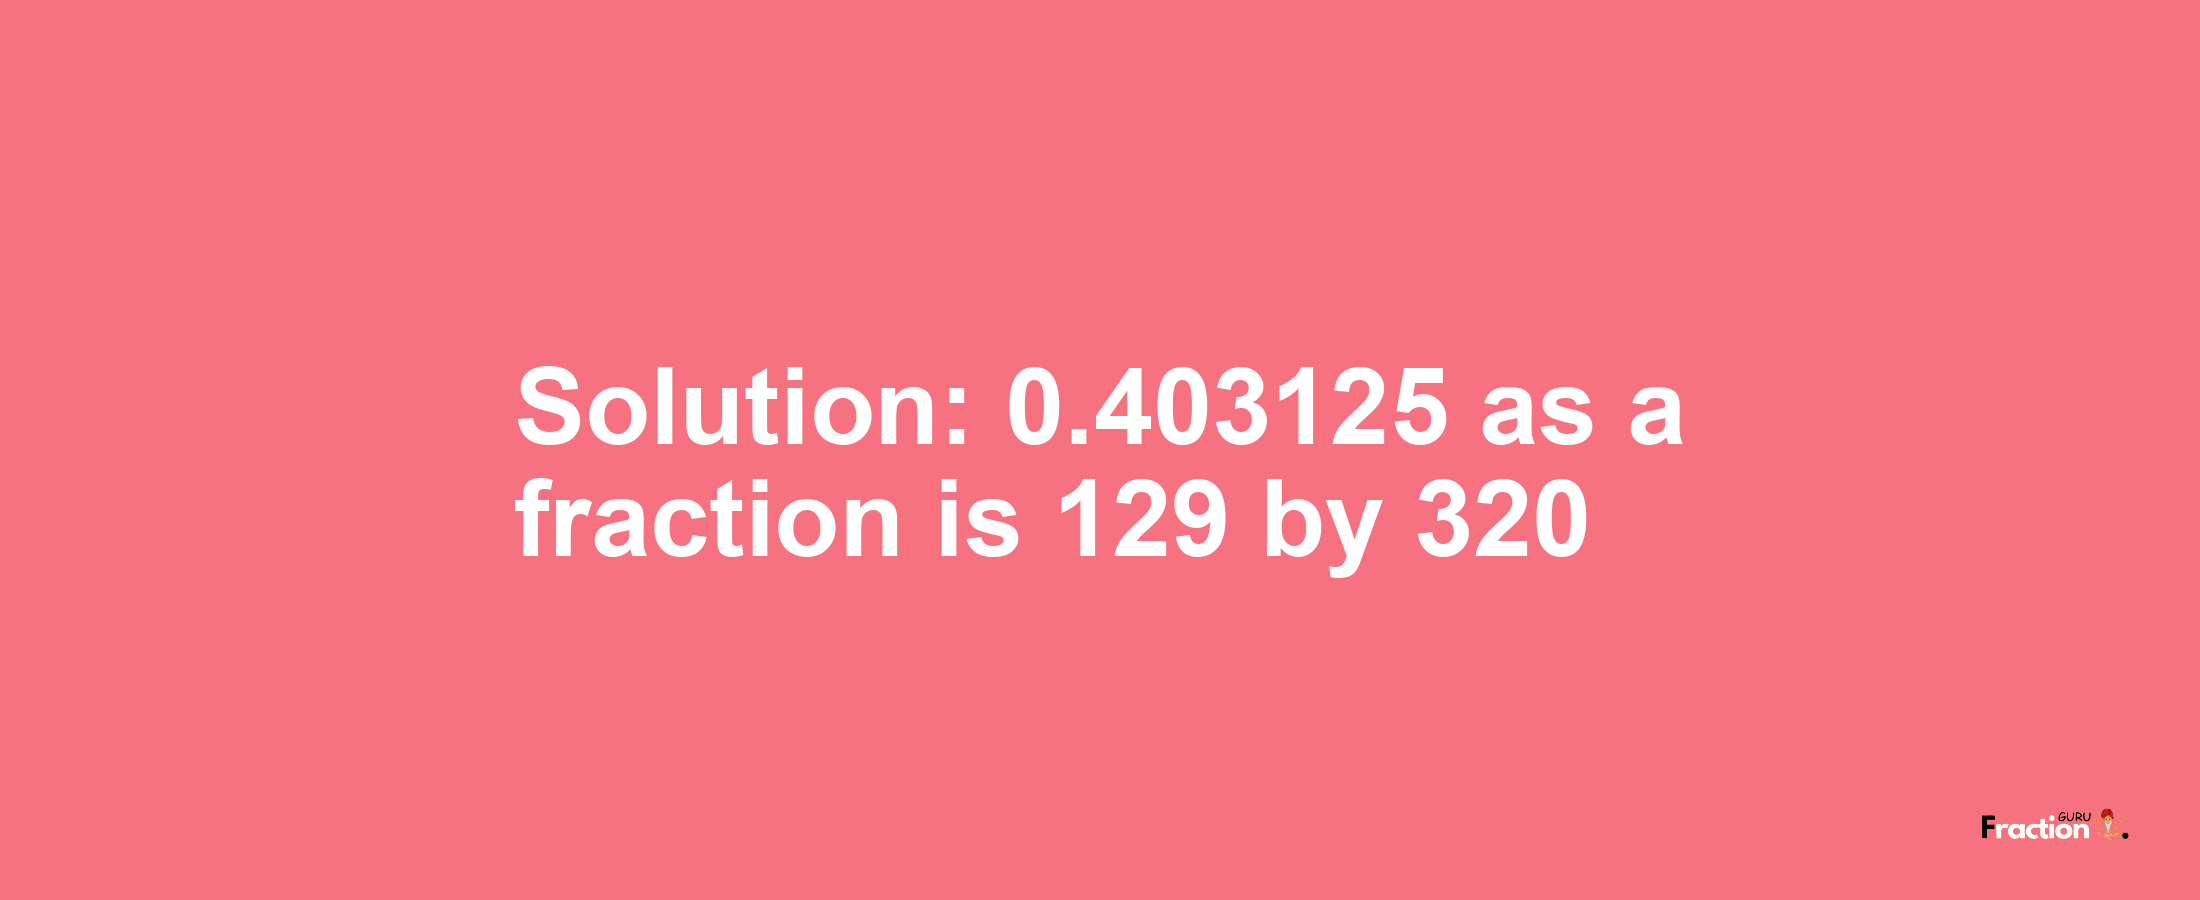 Solution:0.403125 as a fraction is 129/320